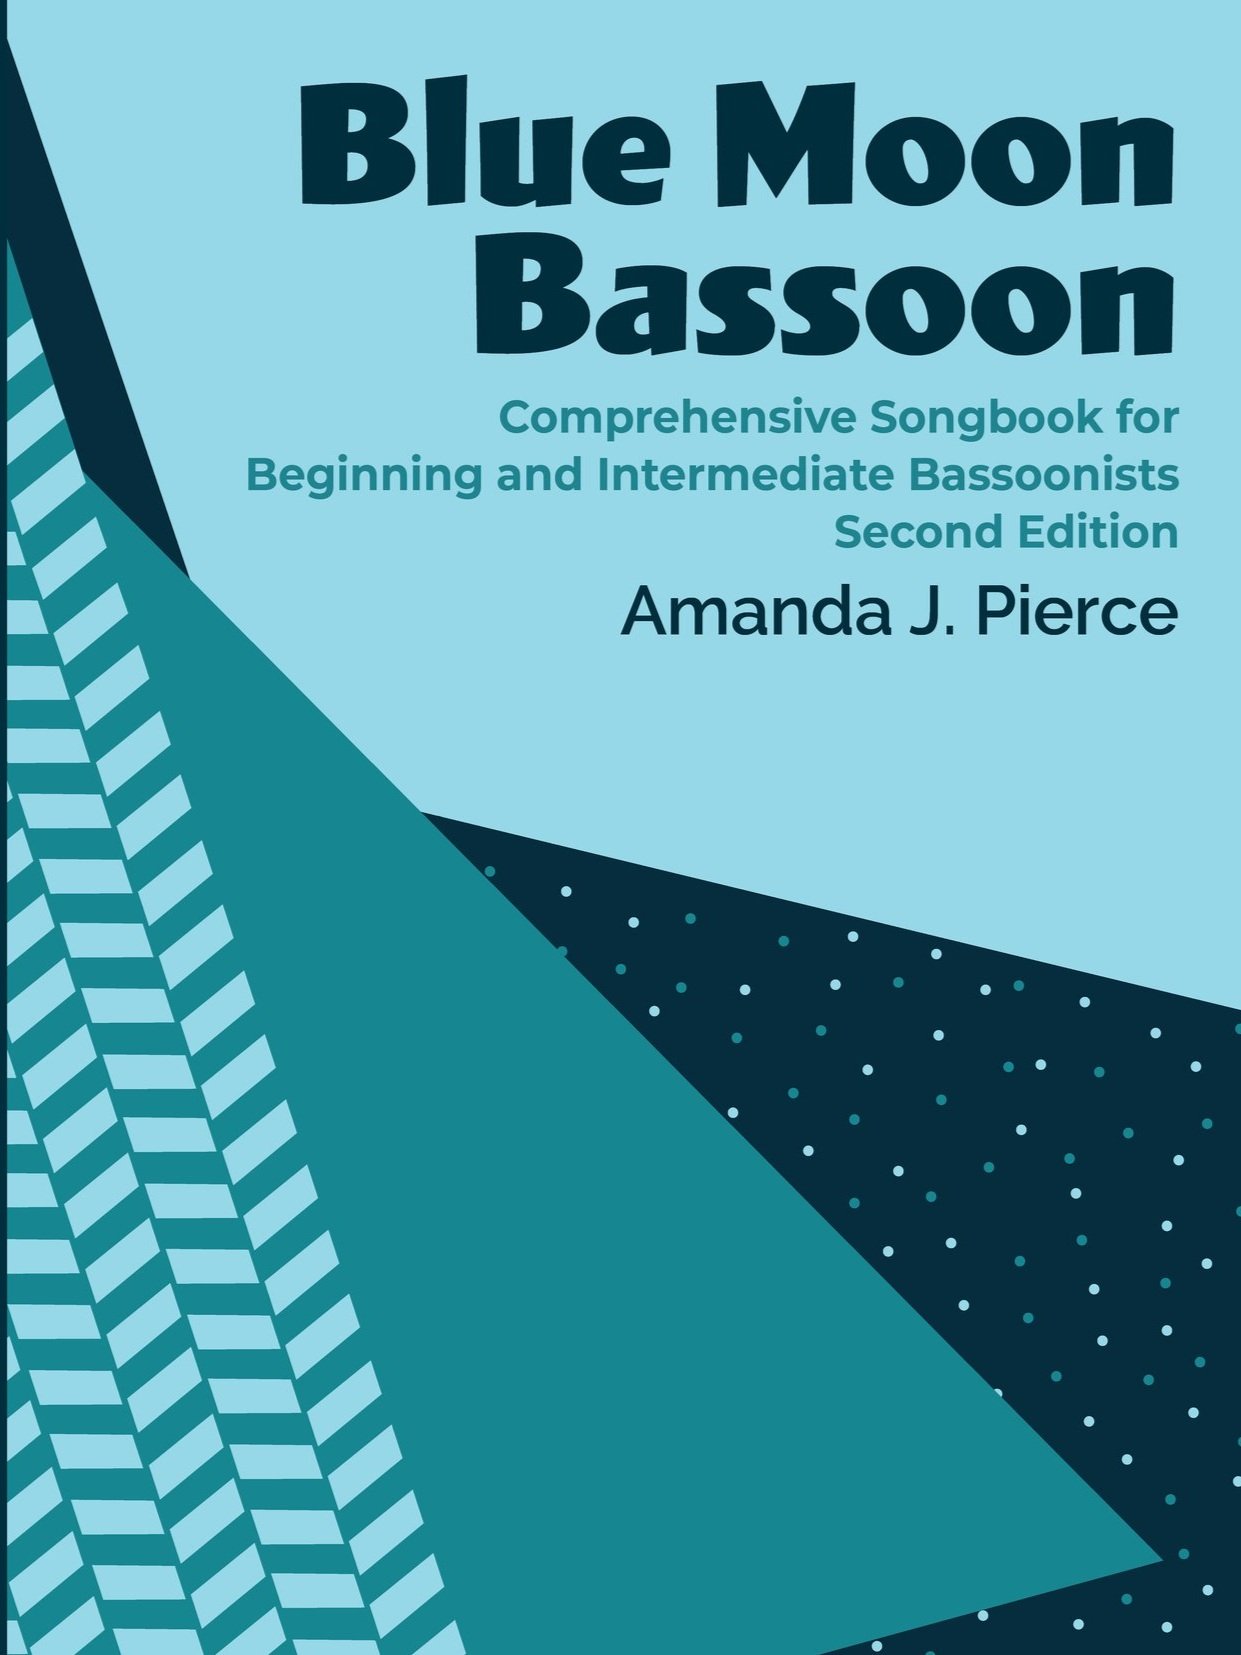  Blue Moon Bassoon Songbook - Second Edition 